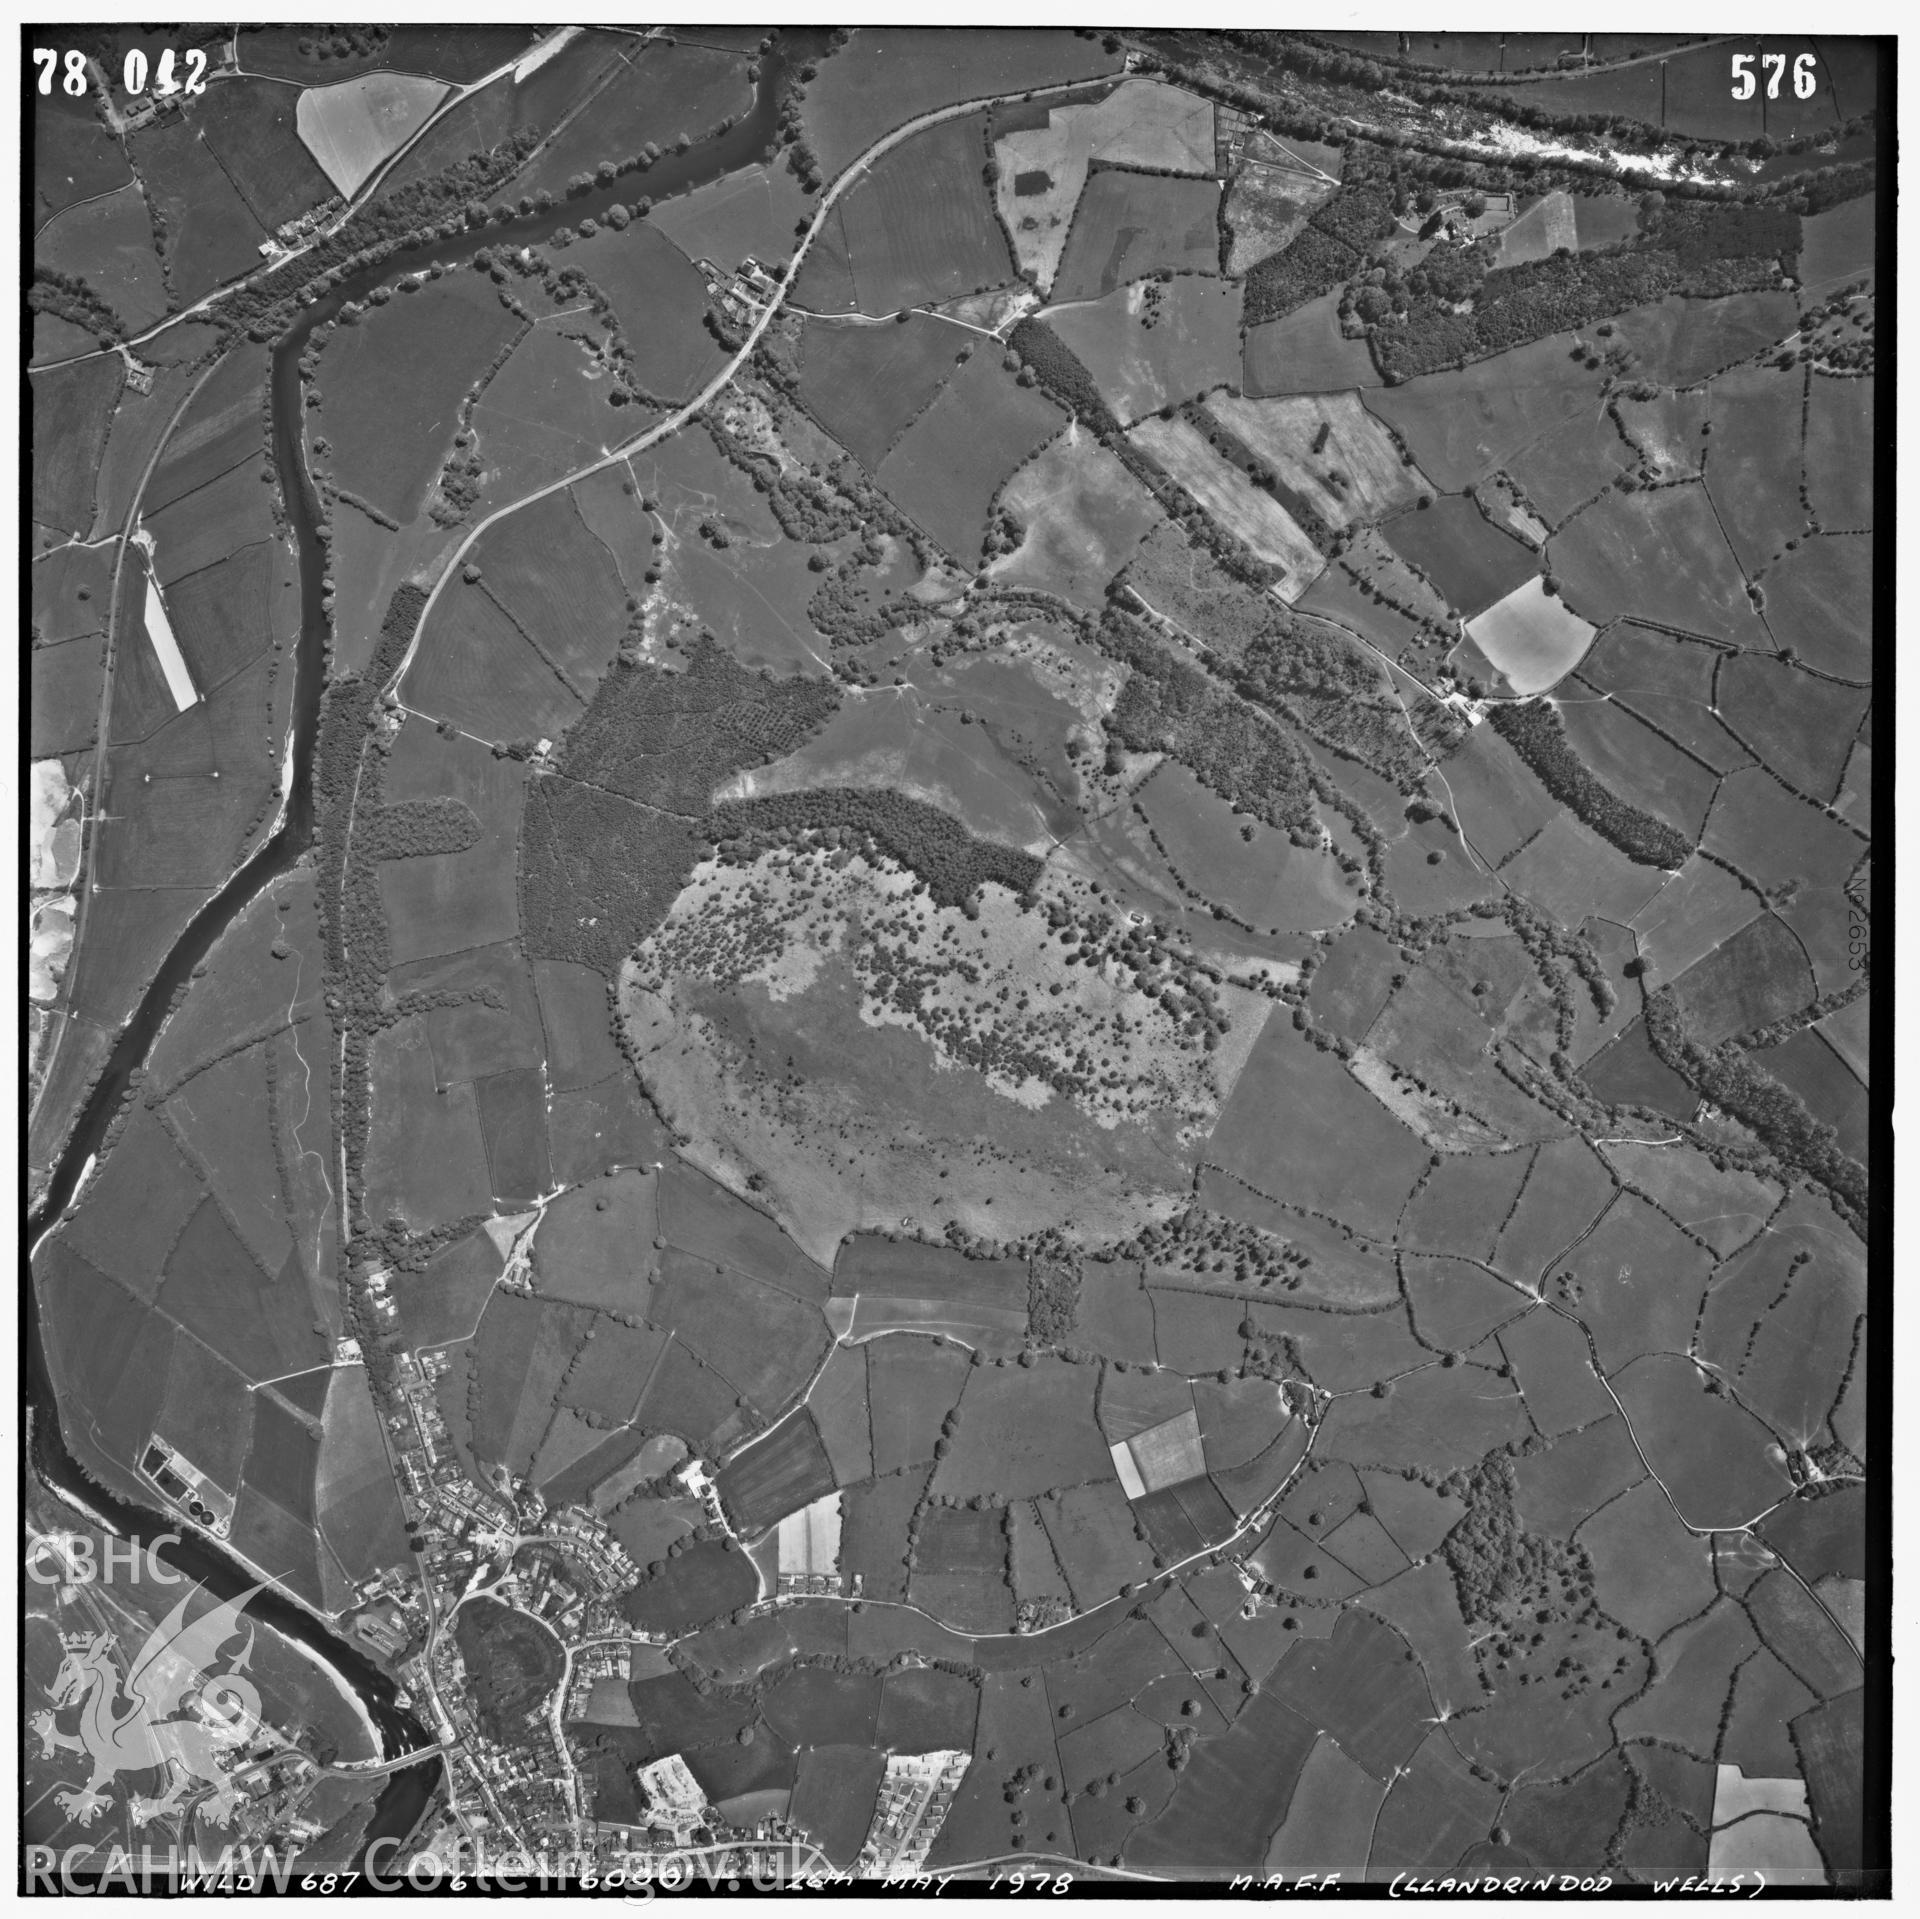 Digitized copy of an aerial photograph showing area near Builth Wells, SO0550, taken by Ordnance Survey, 1978.